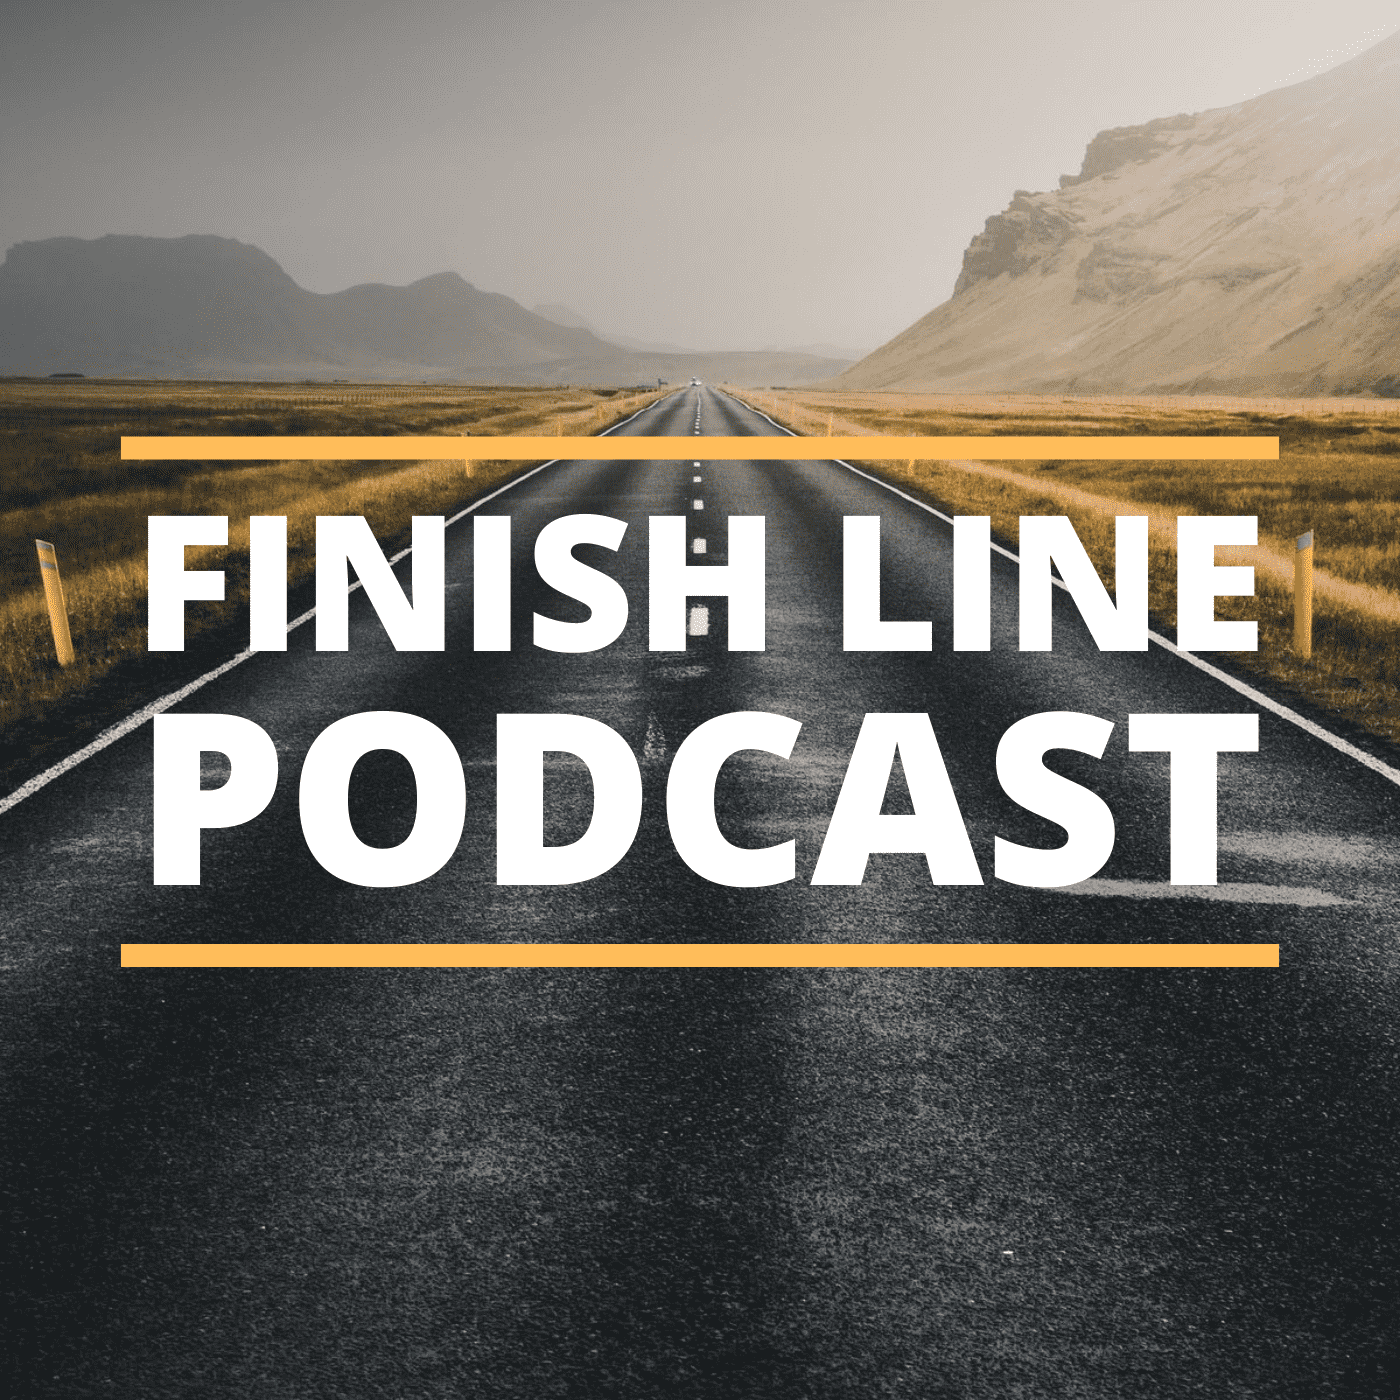 The Finish Line Podcast